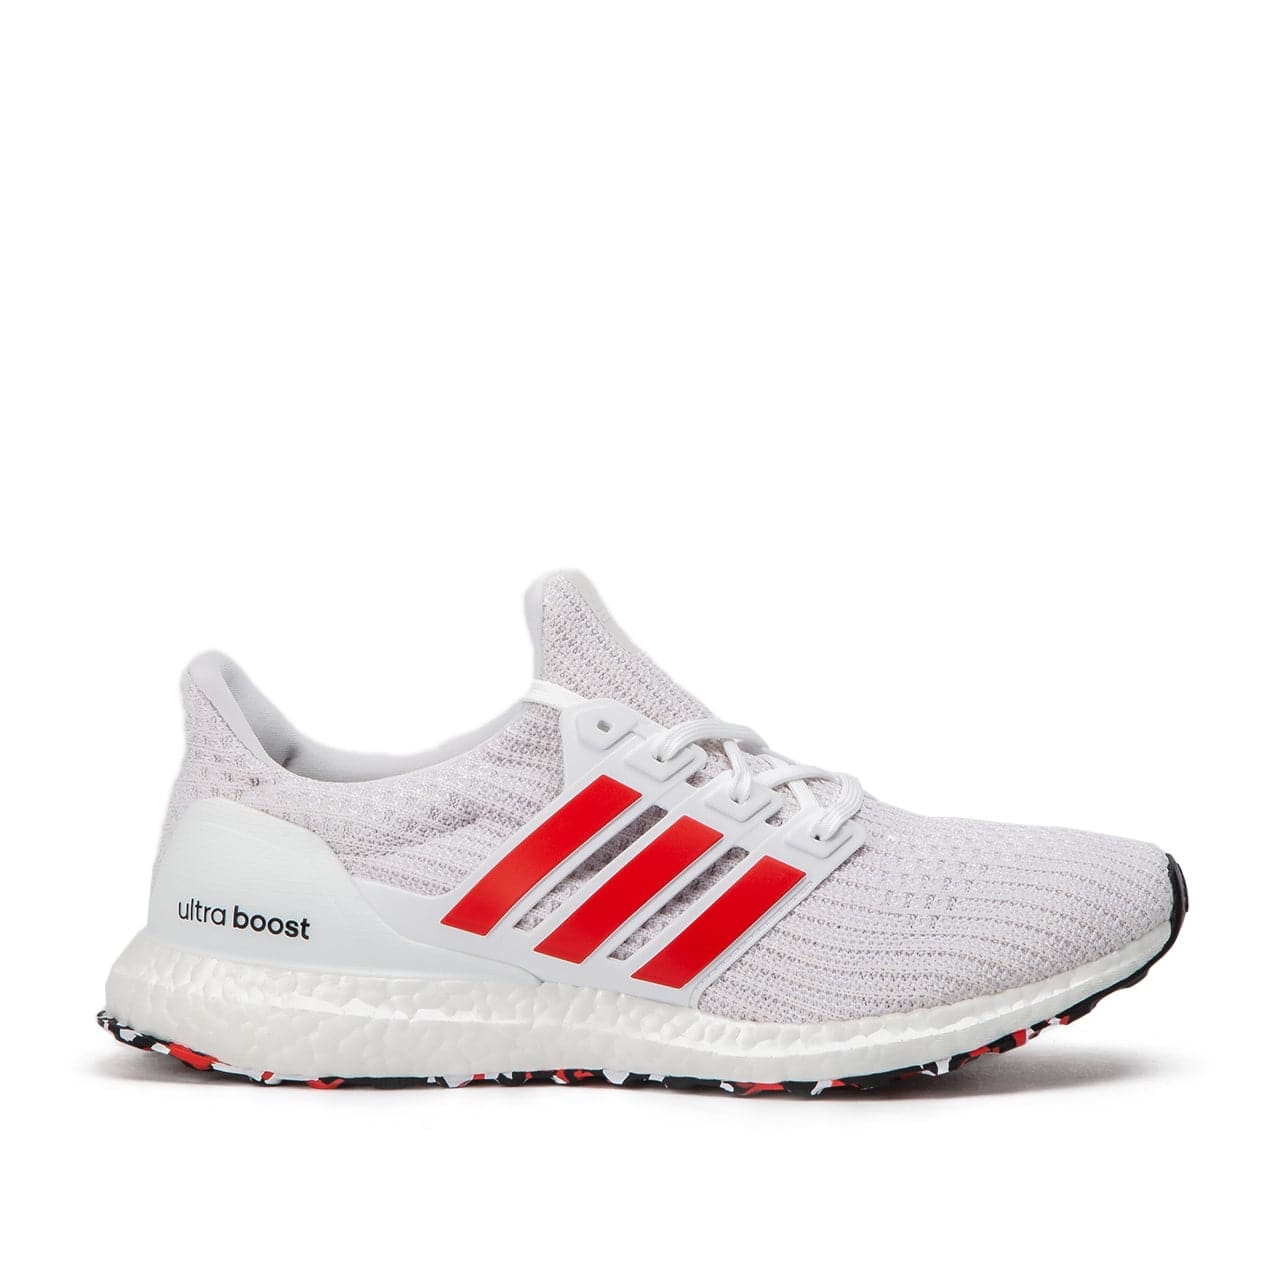 Droogte Punt Profeet Adidas Ultra Boost (White / Red) DB3199 – Allike Store